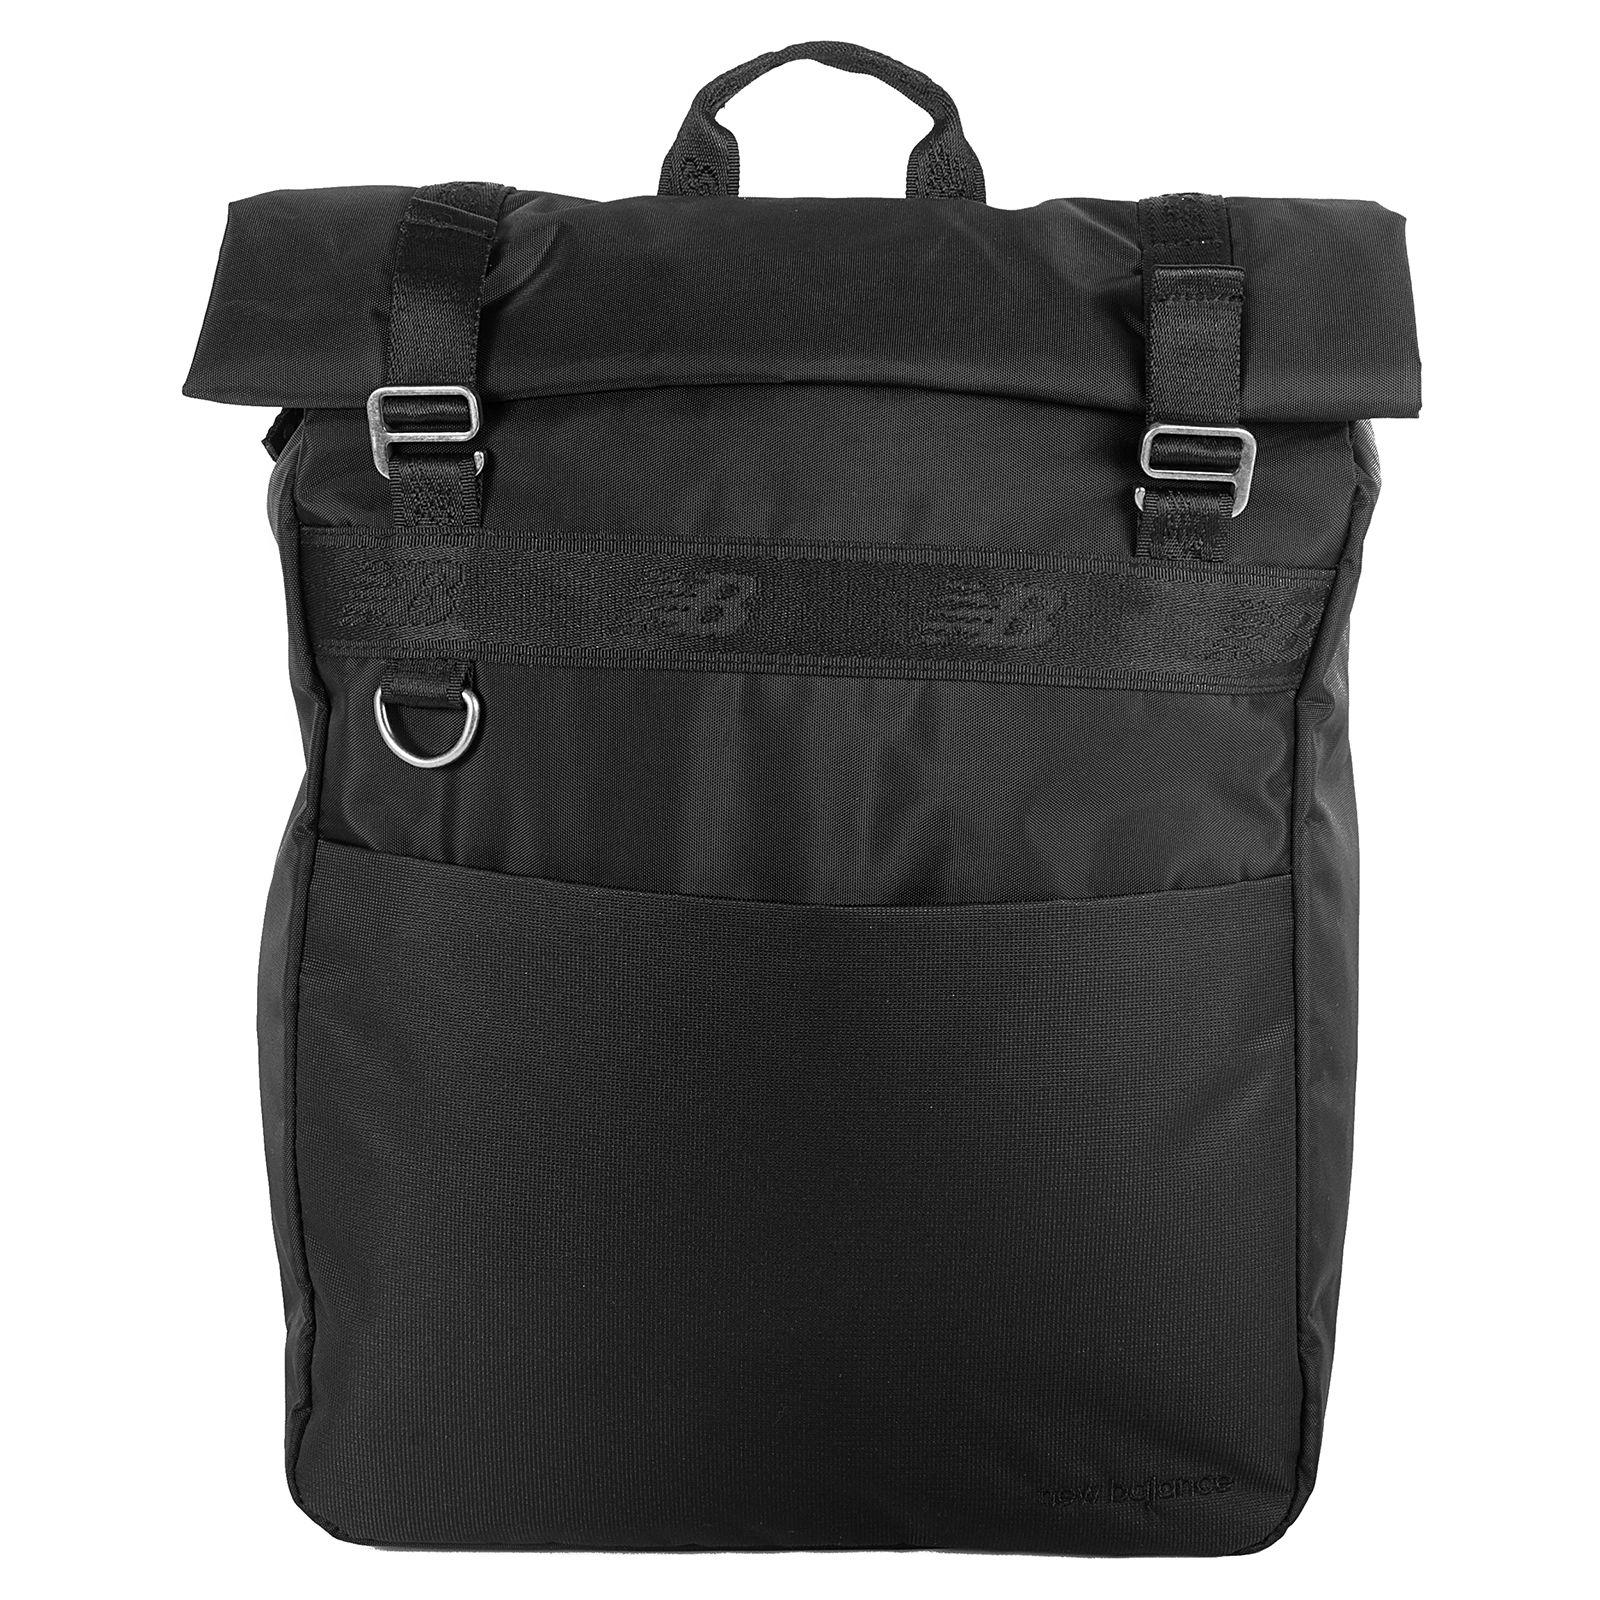 New Balance Athletics Roll Top Backpack in Black for Men - Lyst